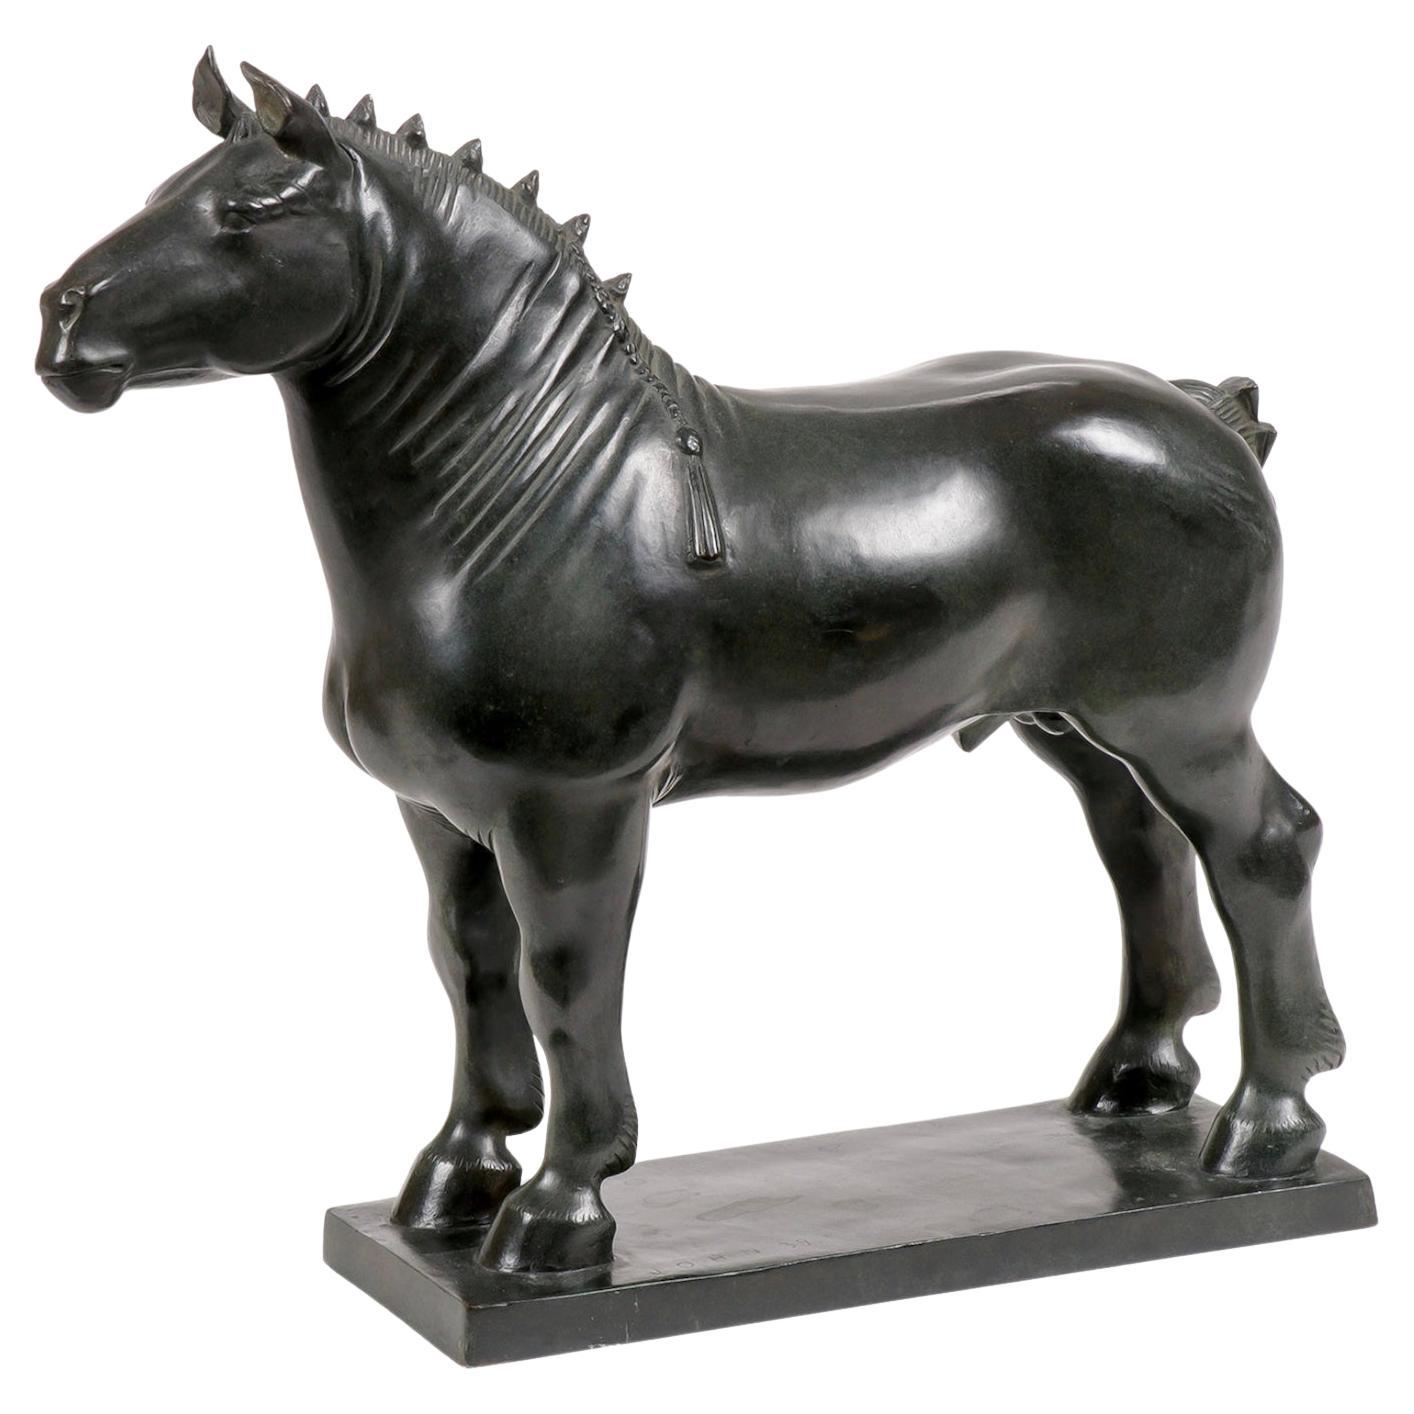 "Standing Horse" by John Held, Jr. For Sale